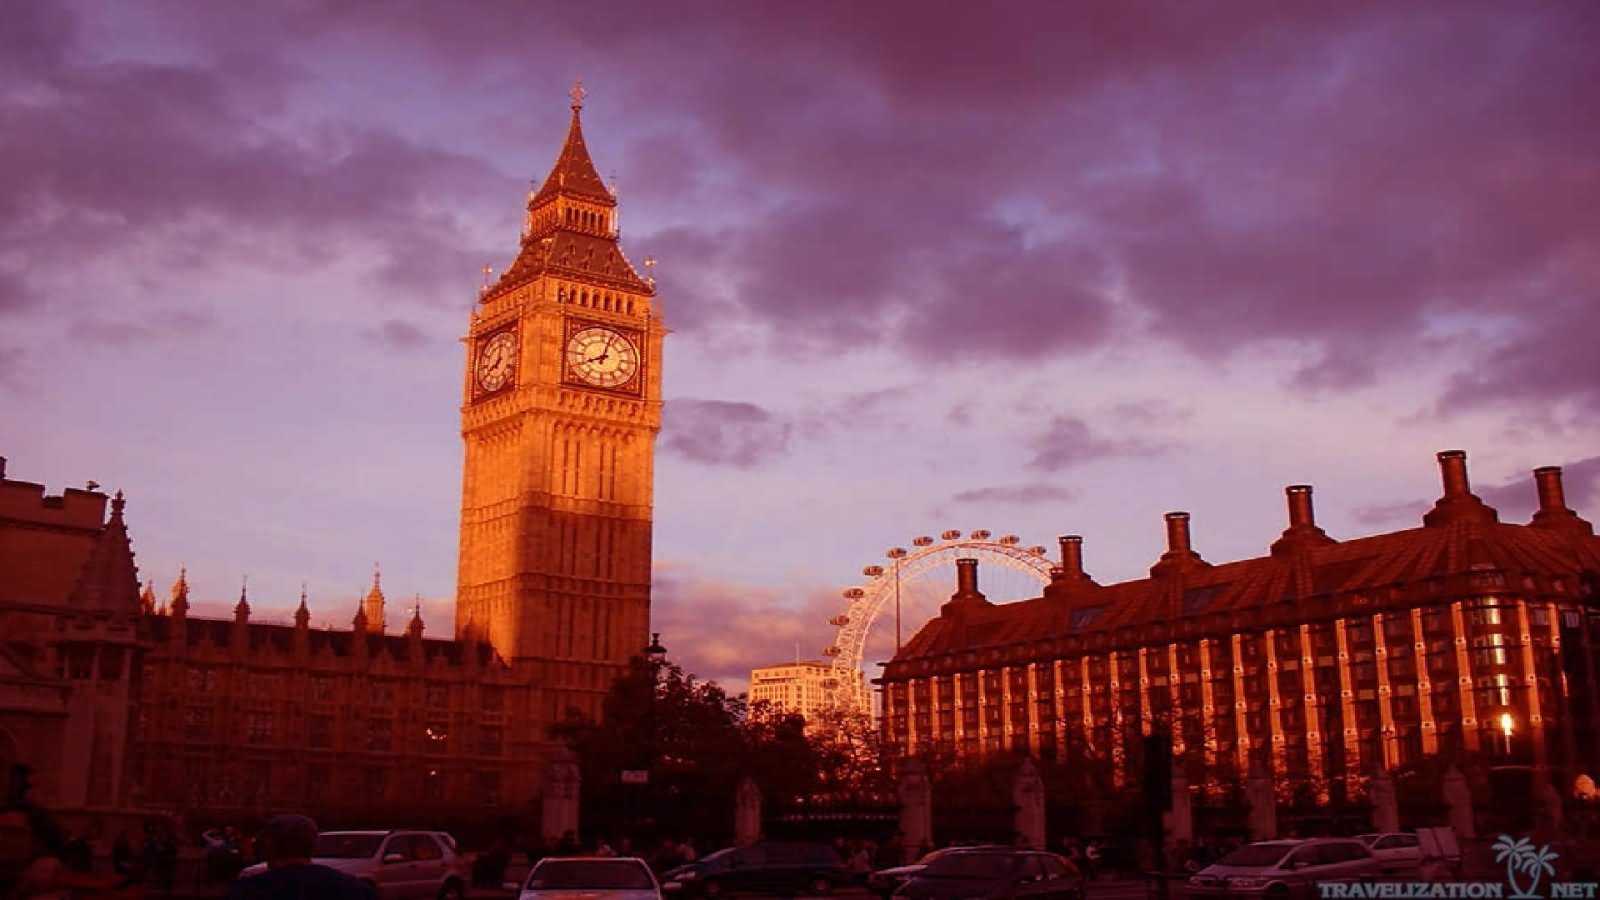 Beautiful Picture Of Big Ben During Sunset